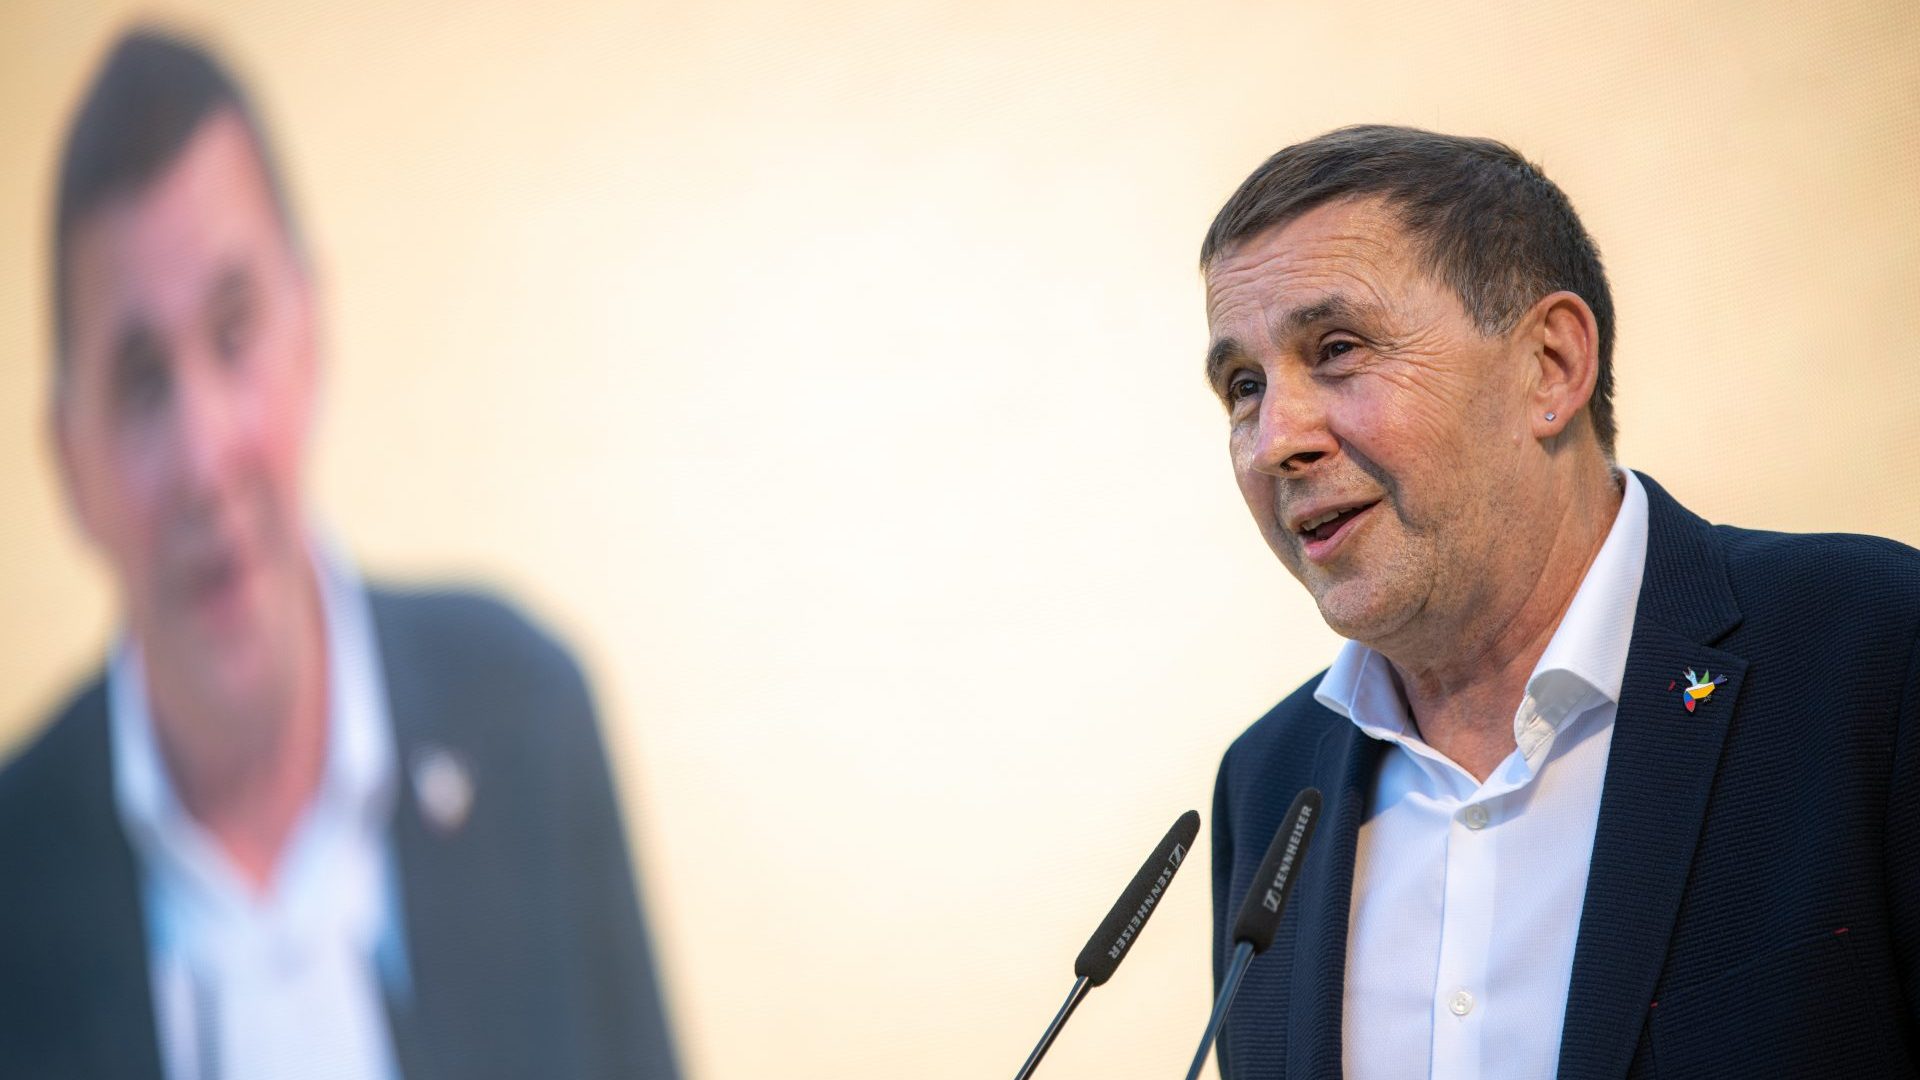 EH Bildu leader and convicted member of the disbanded Eta terrorist group, Arnaldo Otegi, during a rally for Sunday's election in Plaza Comercial. Photo: Lorena Sopena/Europa Press via Getty Images